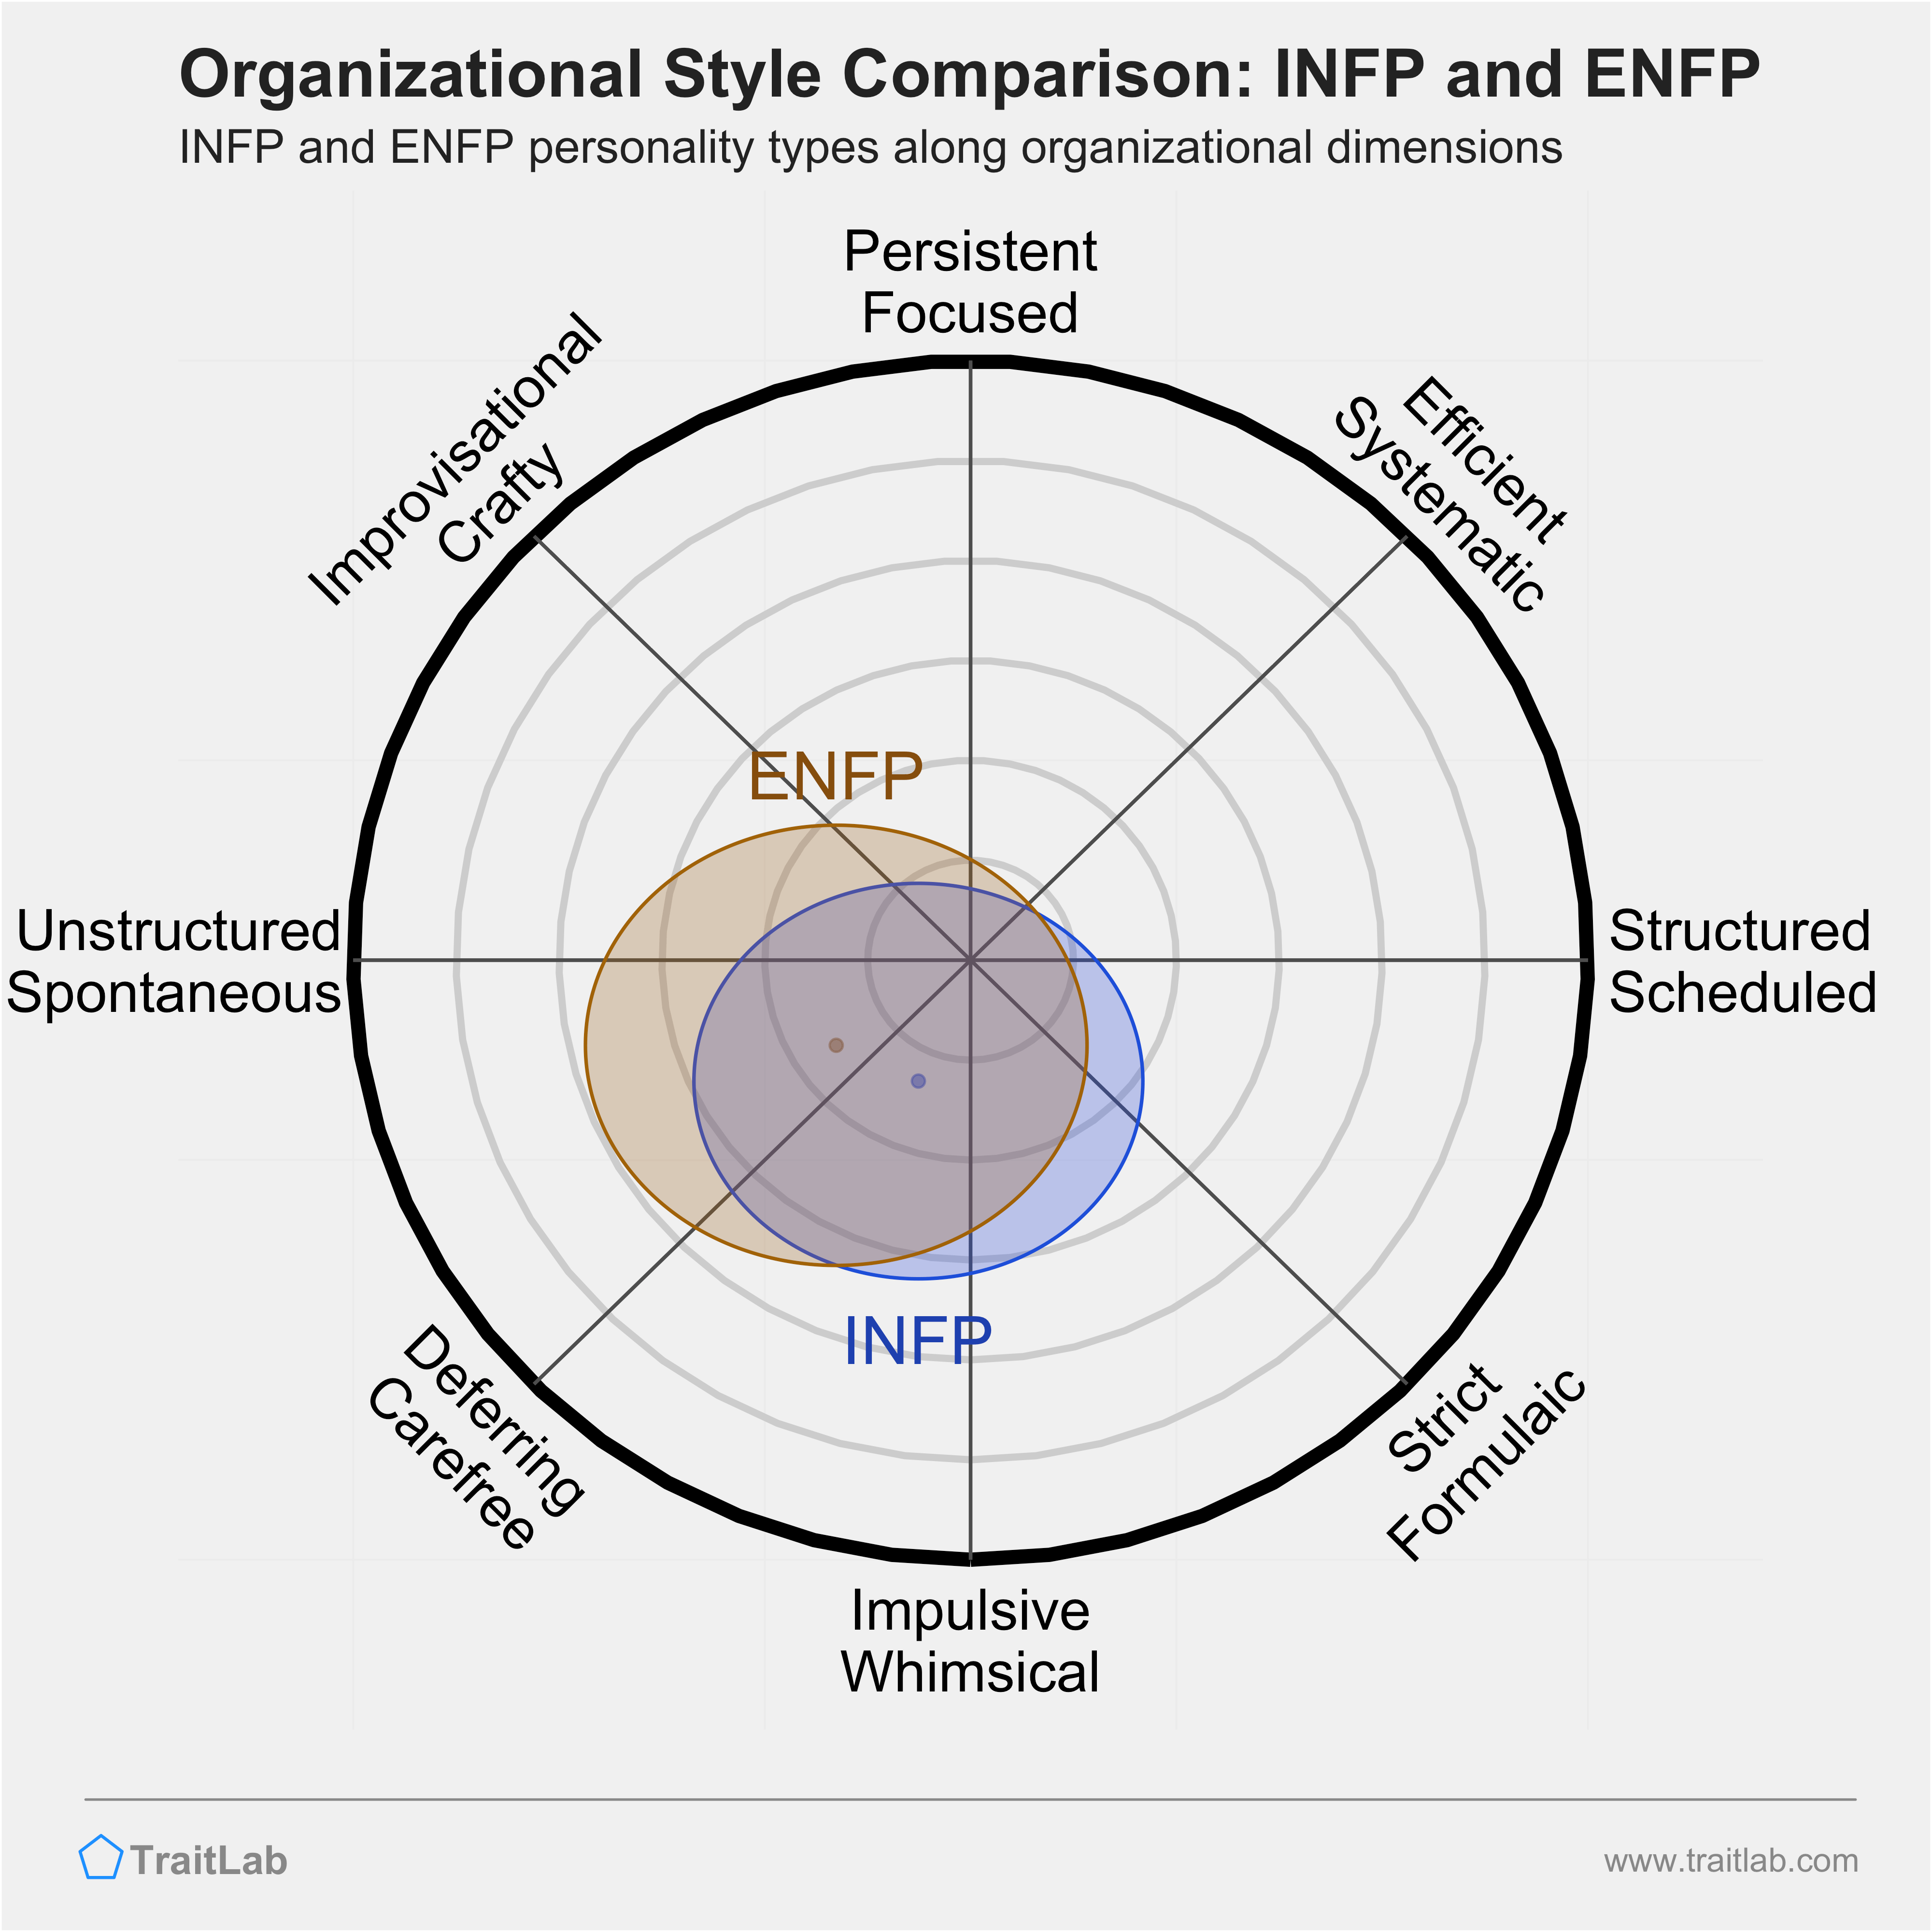 INFP and ENFP comparison across organizational dimensions